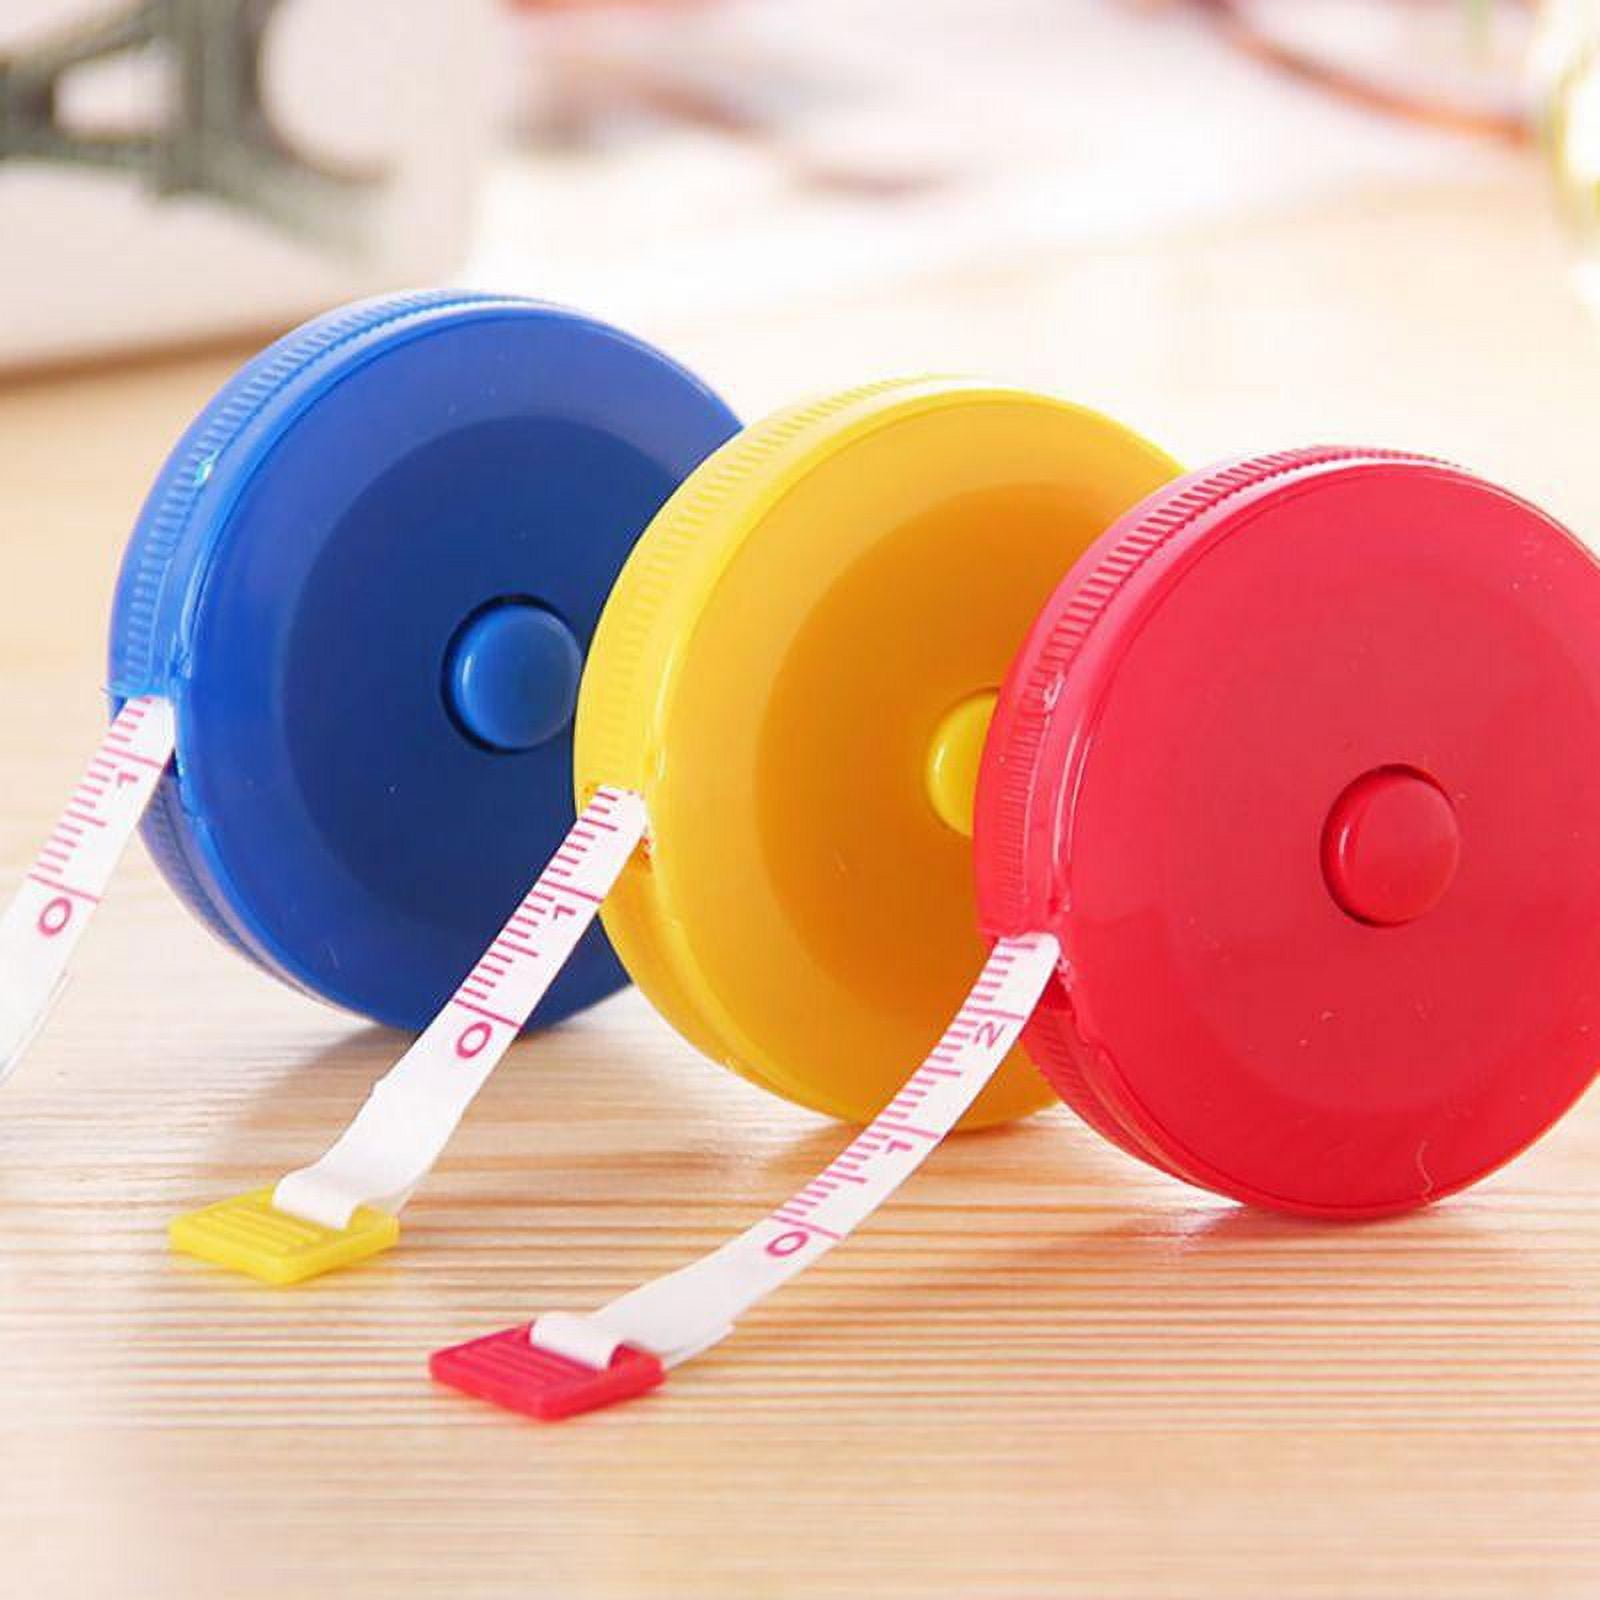 60 Retractable Tape Measure by Loops & Threads | Michaels